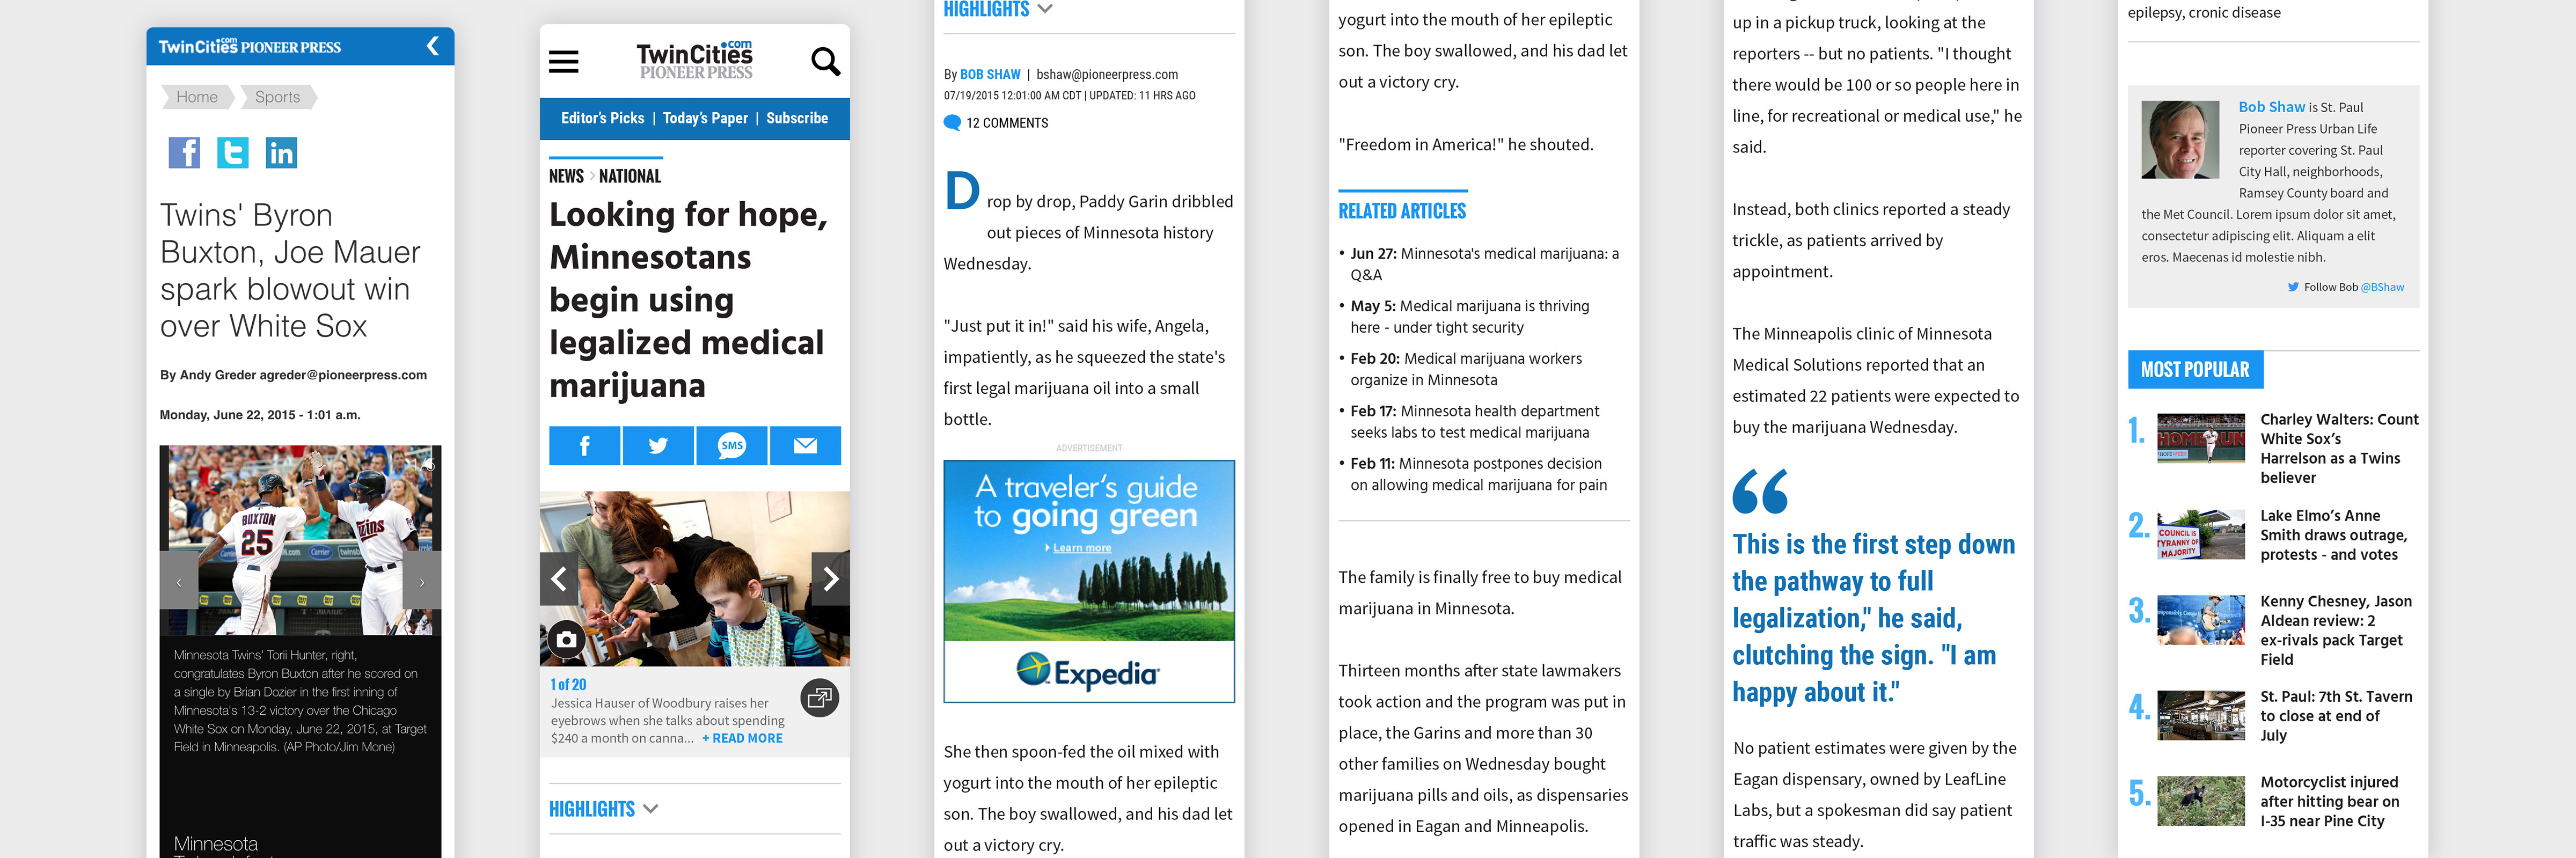 A series of thin screenshots of the mobile site, displaying headlines, images, drop quotes, related articles, and general link text, all in a light blue color scheme